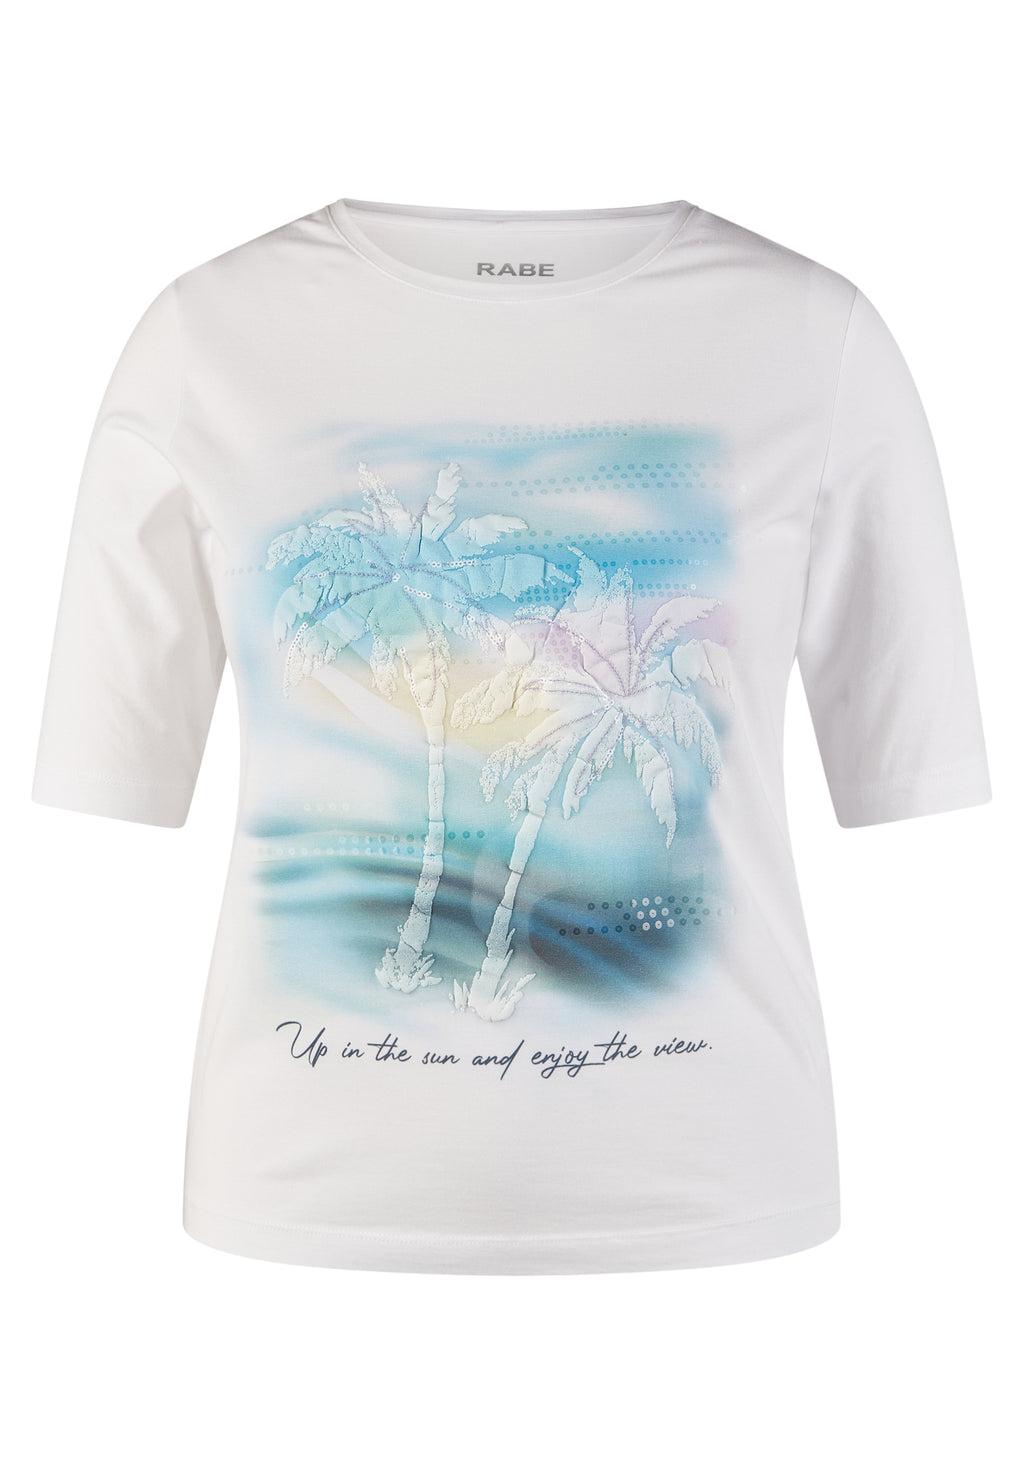 Rabe salty breeze collection printed white tshirt, product code 52-123302